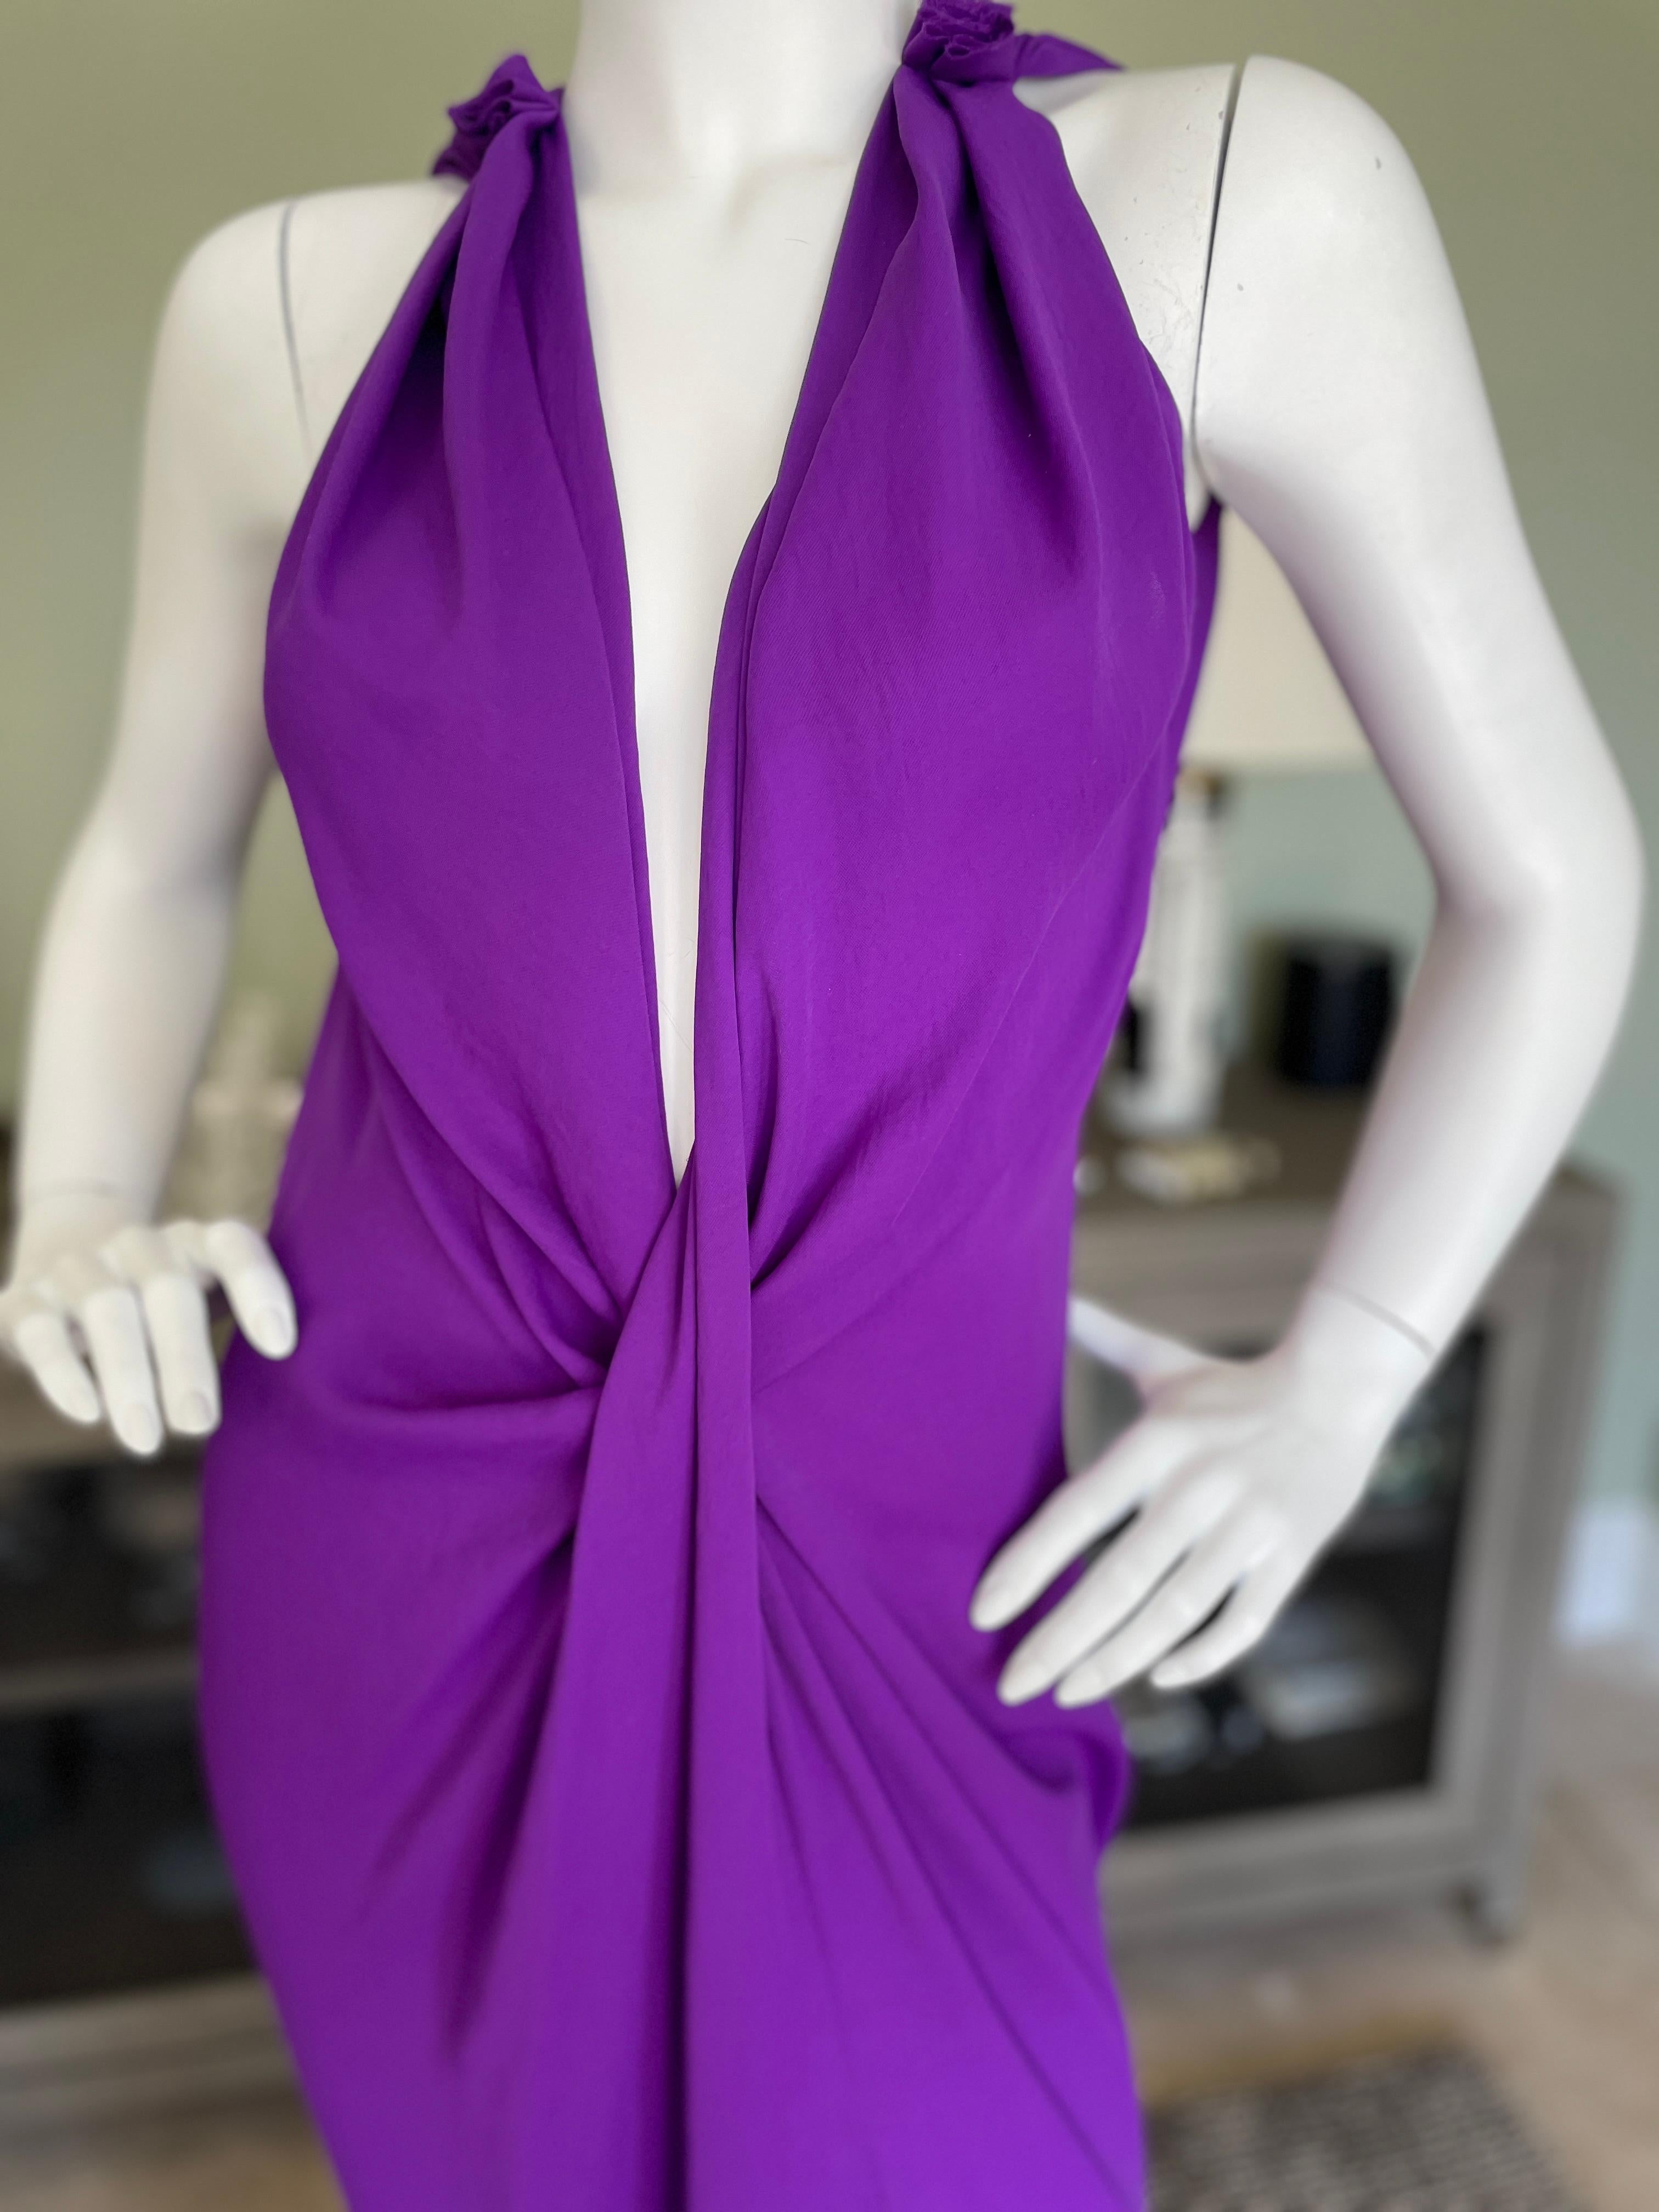  Lanvin by Alber Elbaz 2014 Plunging Purple Evening Dress with High Slit For Sale 2